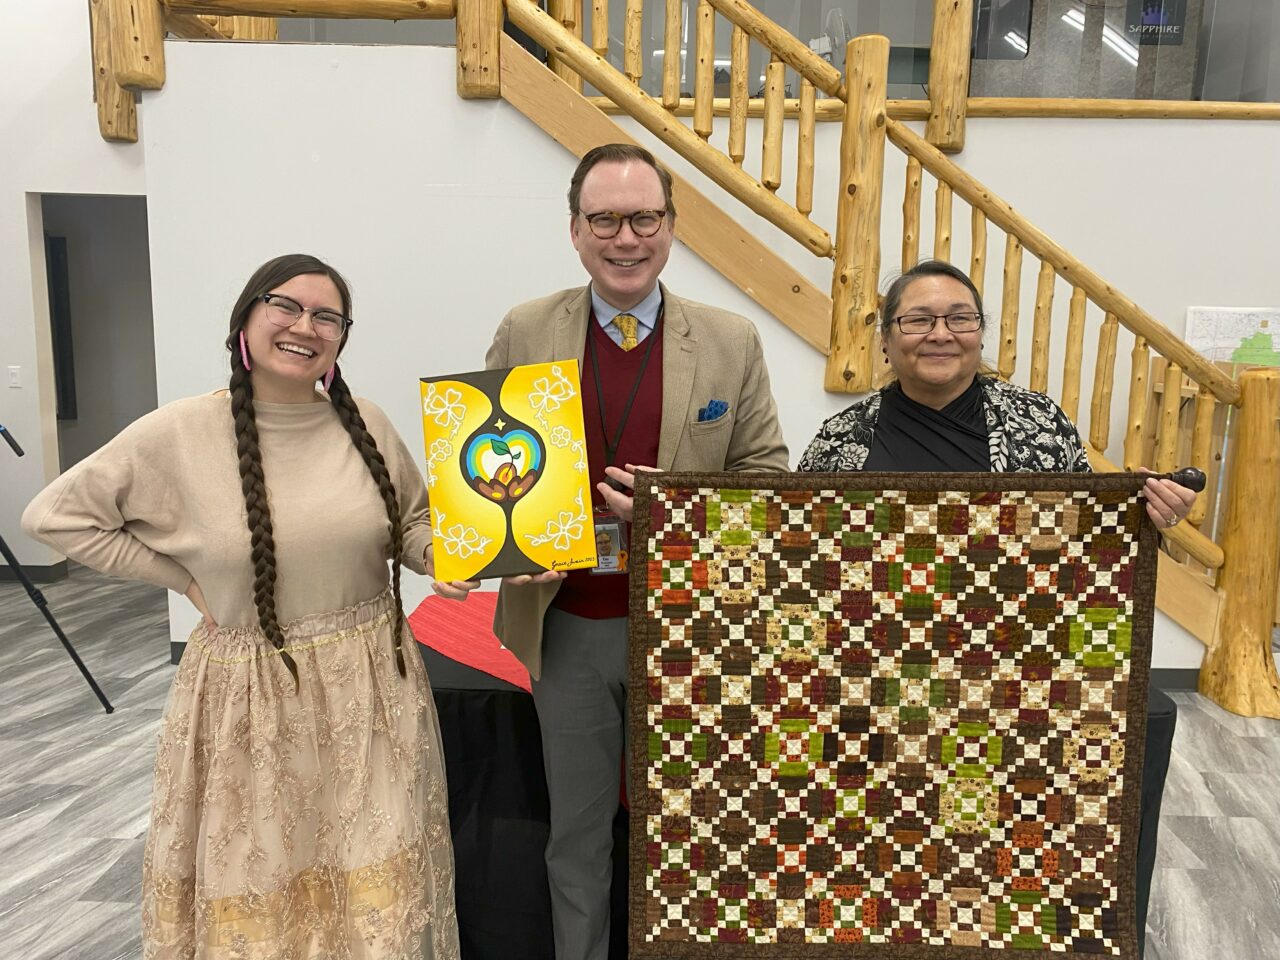 Gift Exchange at Signing Ceremony

Gift Exchange, on (left) Grace Swain Indigenous artist and Communications and Media Specialist for the Maamwesying Ontario Health Team, (middle) Tim Vine, President and CEO of NSHN, (right) Carol Eshkakogan, CEO of Maamwesying North Shore Community Health Services Inc./Chair of the Maamwesying Ontario Health Team Leadership Council

